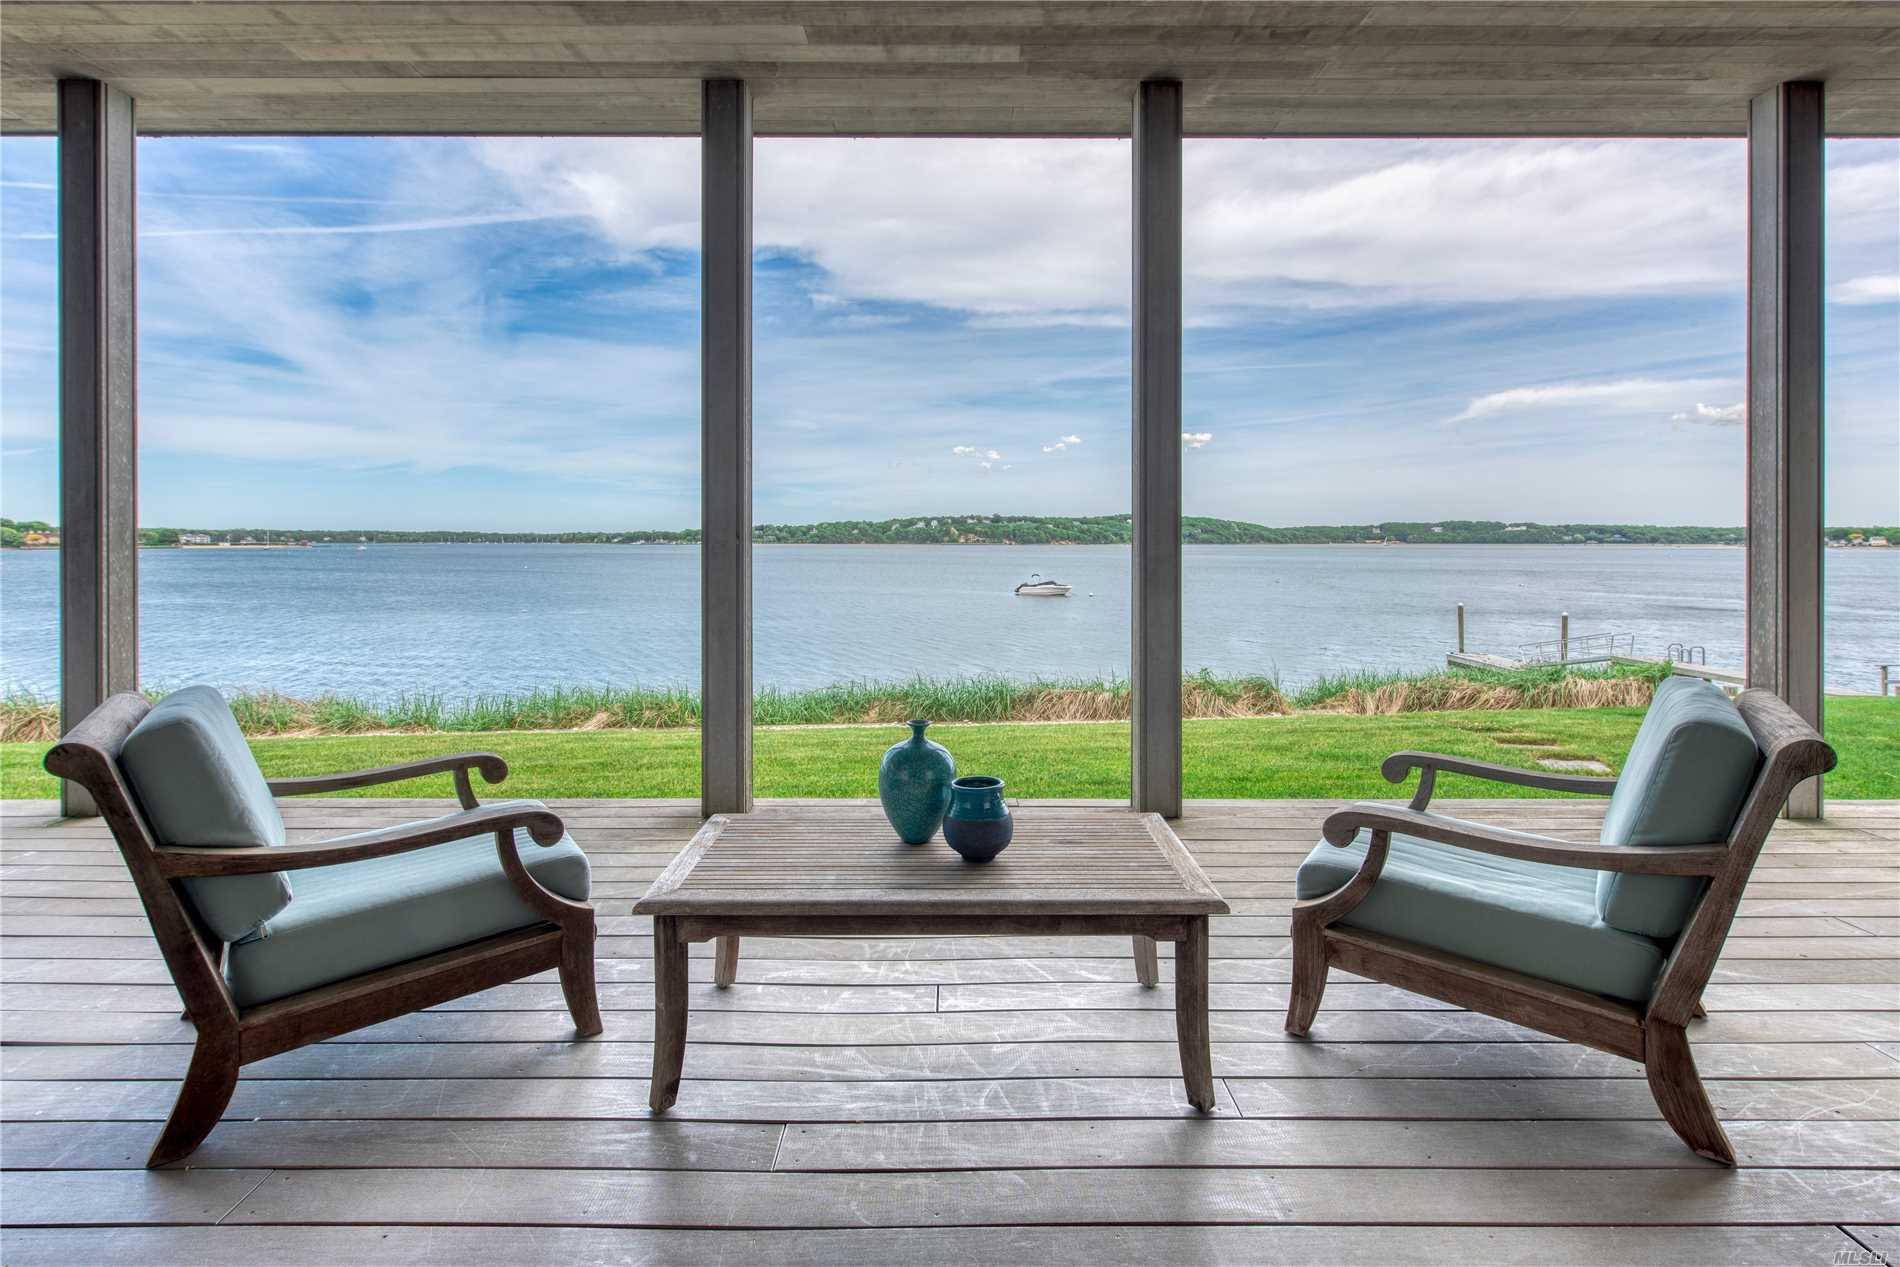 Peaceful Perfection on Peconic Bay. This Open Concept Contemporary Treasure Reflects Simplicity in Design at its Finest.  Stunning Views of Shelter Island Welcome You as You Enter the Great Room Foyer. Clean Lines and Minimalist Architecture with Attention to Detail at Every Turn Creating a Unique and Tranquil Living Experience. Come Discover Serenity.